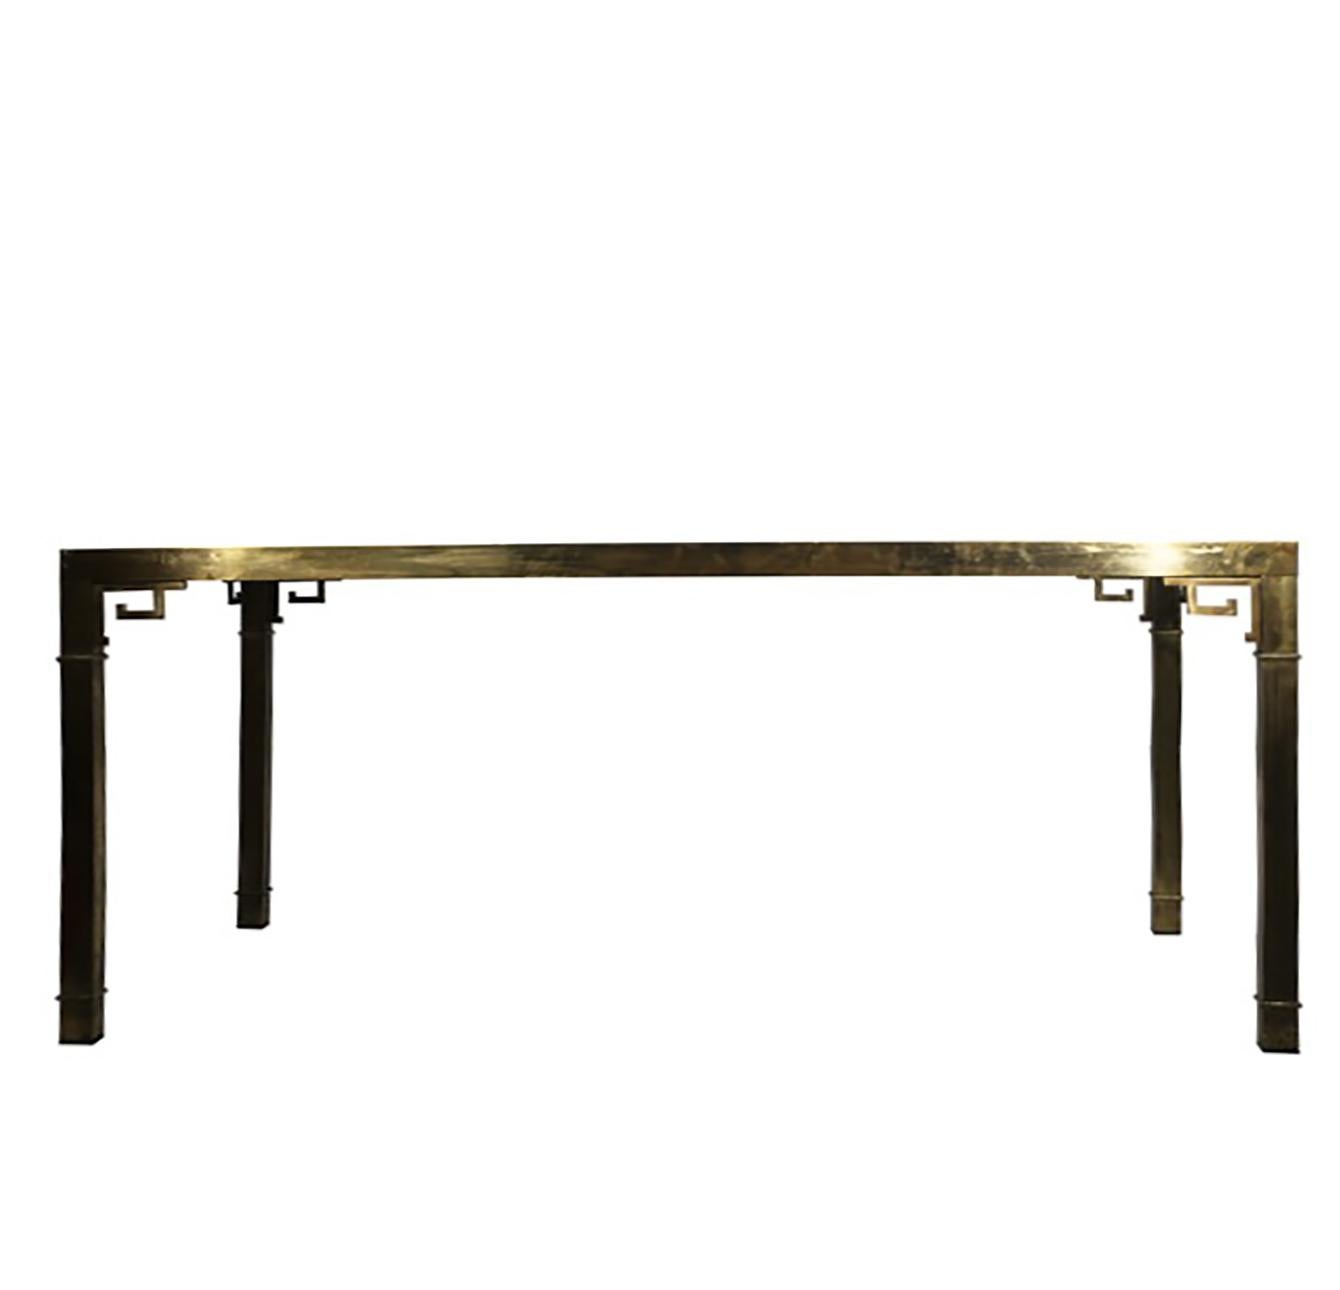 This Mastercraft brass and beveled glass dining table has a handsome Greek key design.
The Greek key motif is classic, modern and therefore timeless.
Brass has beautiful color and patina.
There is 27